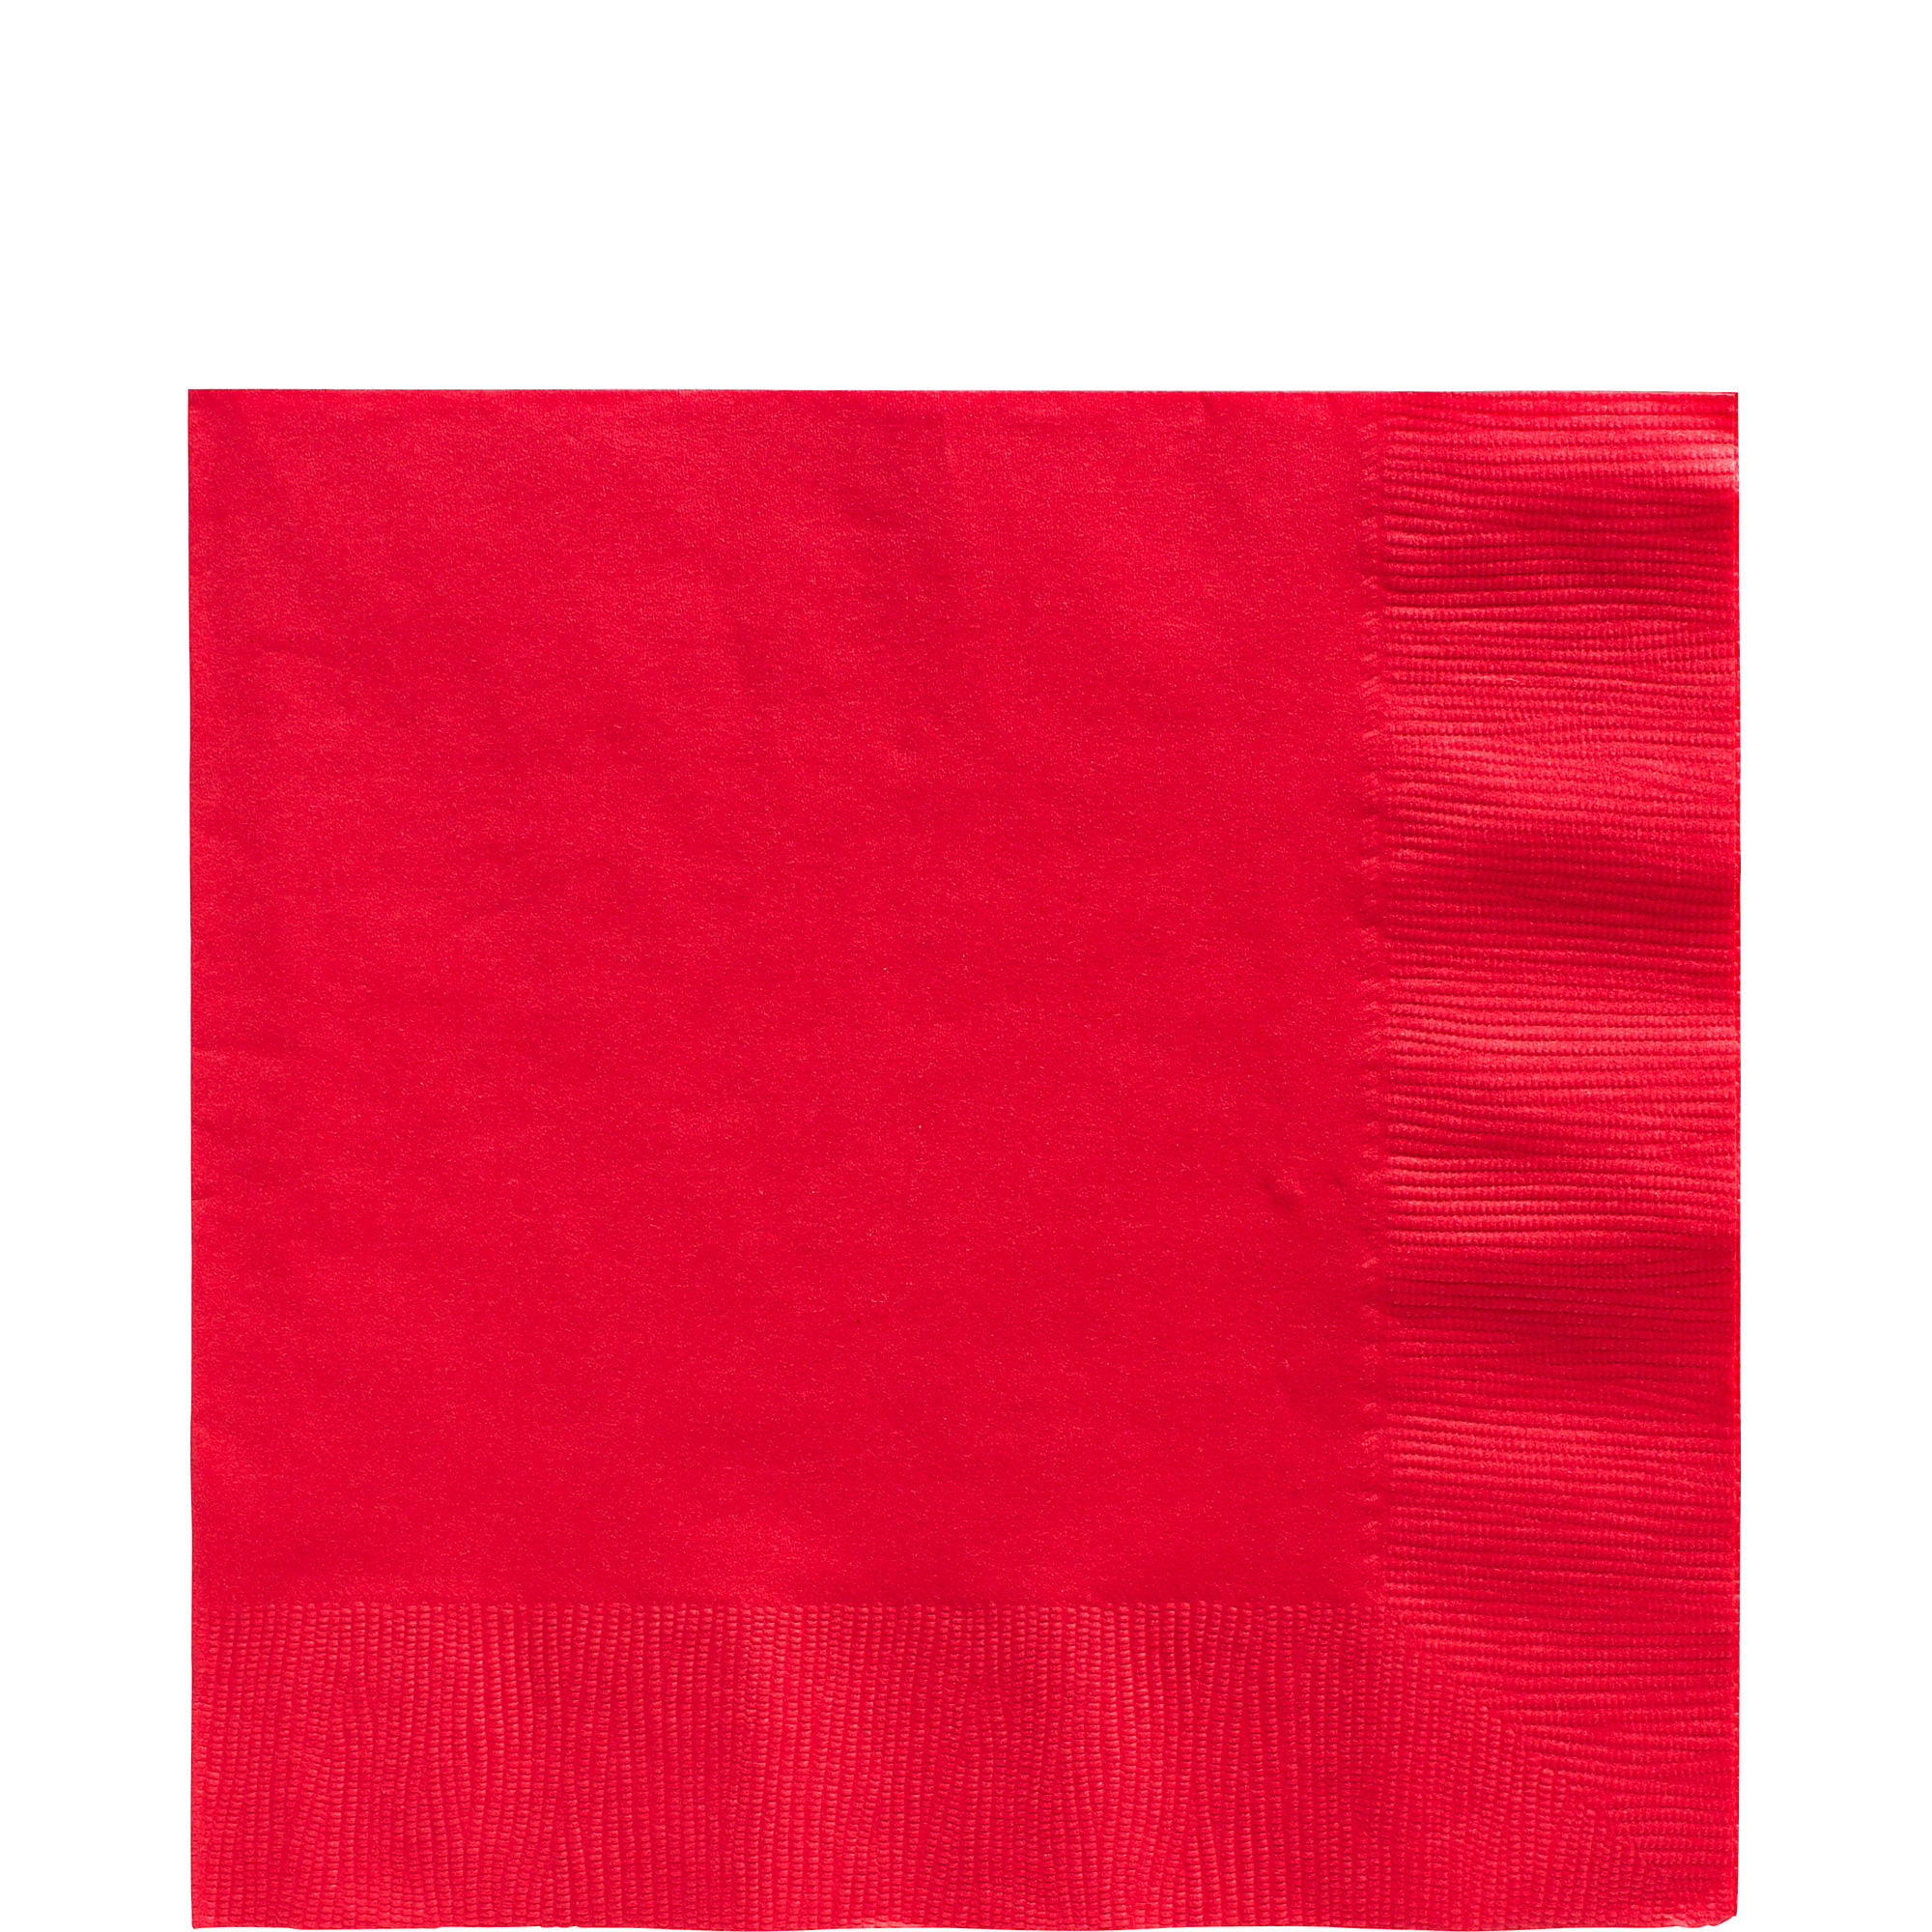 paper 5 x 5 6.5 x 6.5 Apple Red Amscan 60215.4 Party Perfect Vibrant 2-Ply Beverage Napkins Tableware Pack of 50